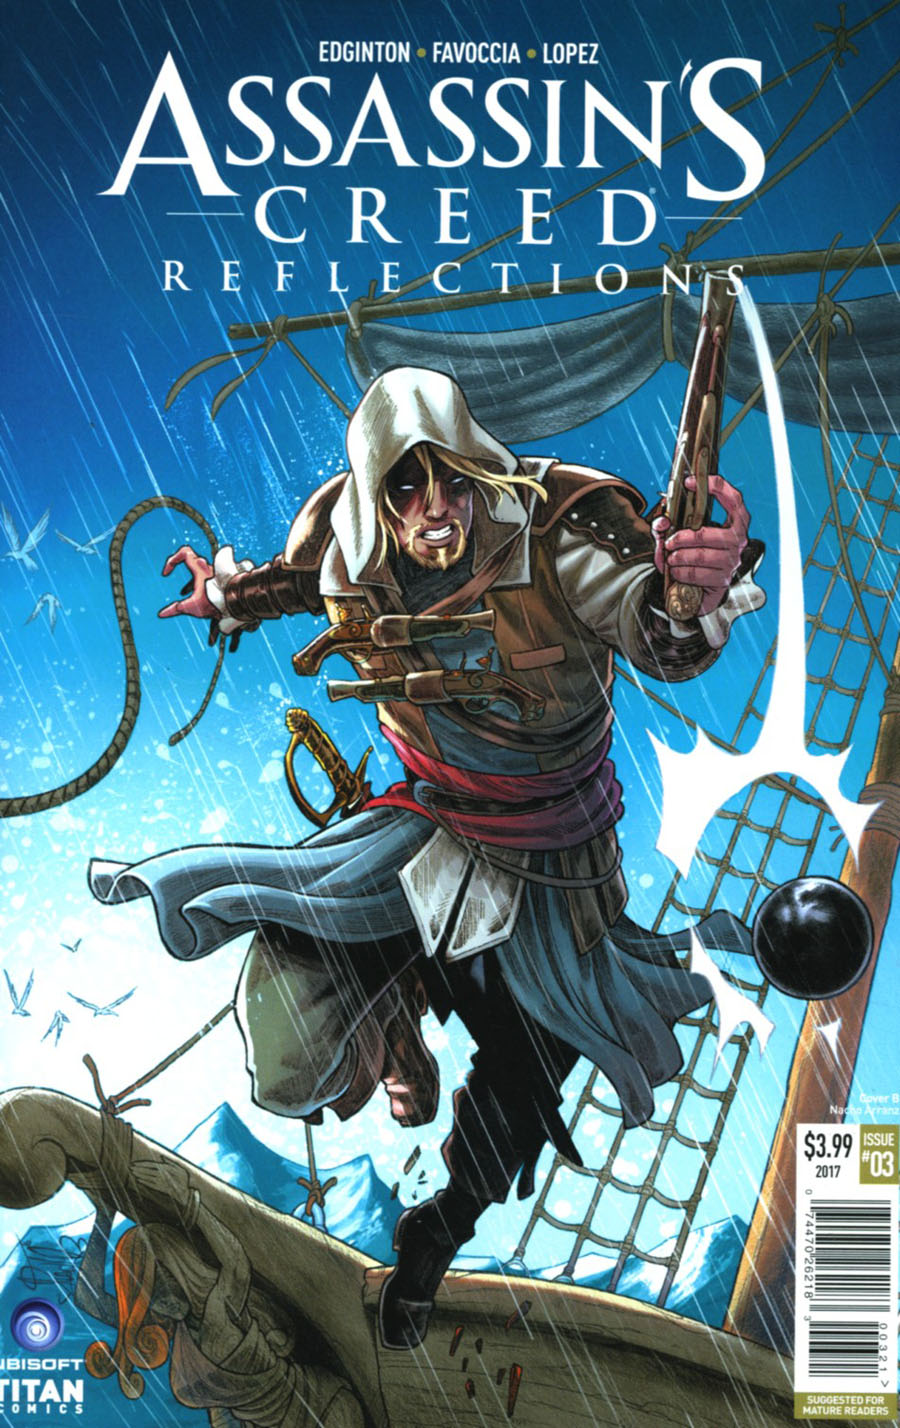 Assassins Creed Reflections #3 Cover B Variant Nacho Arranz Cover